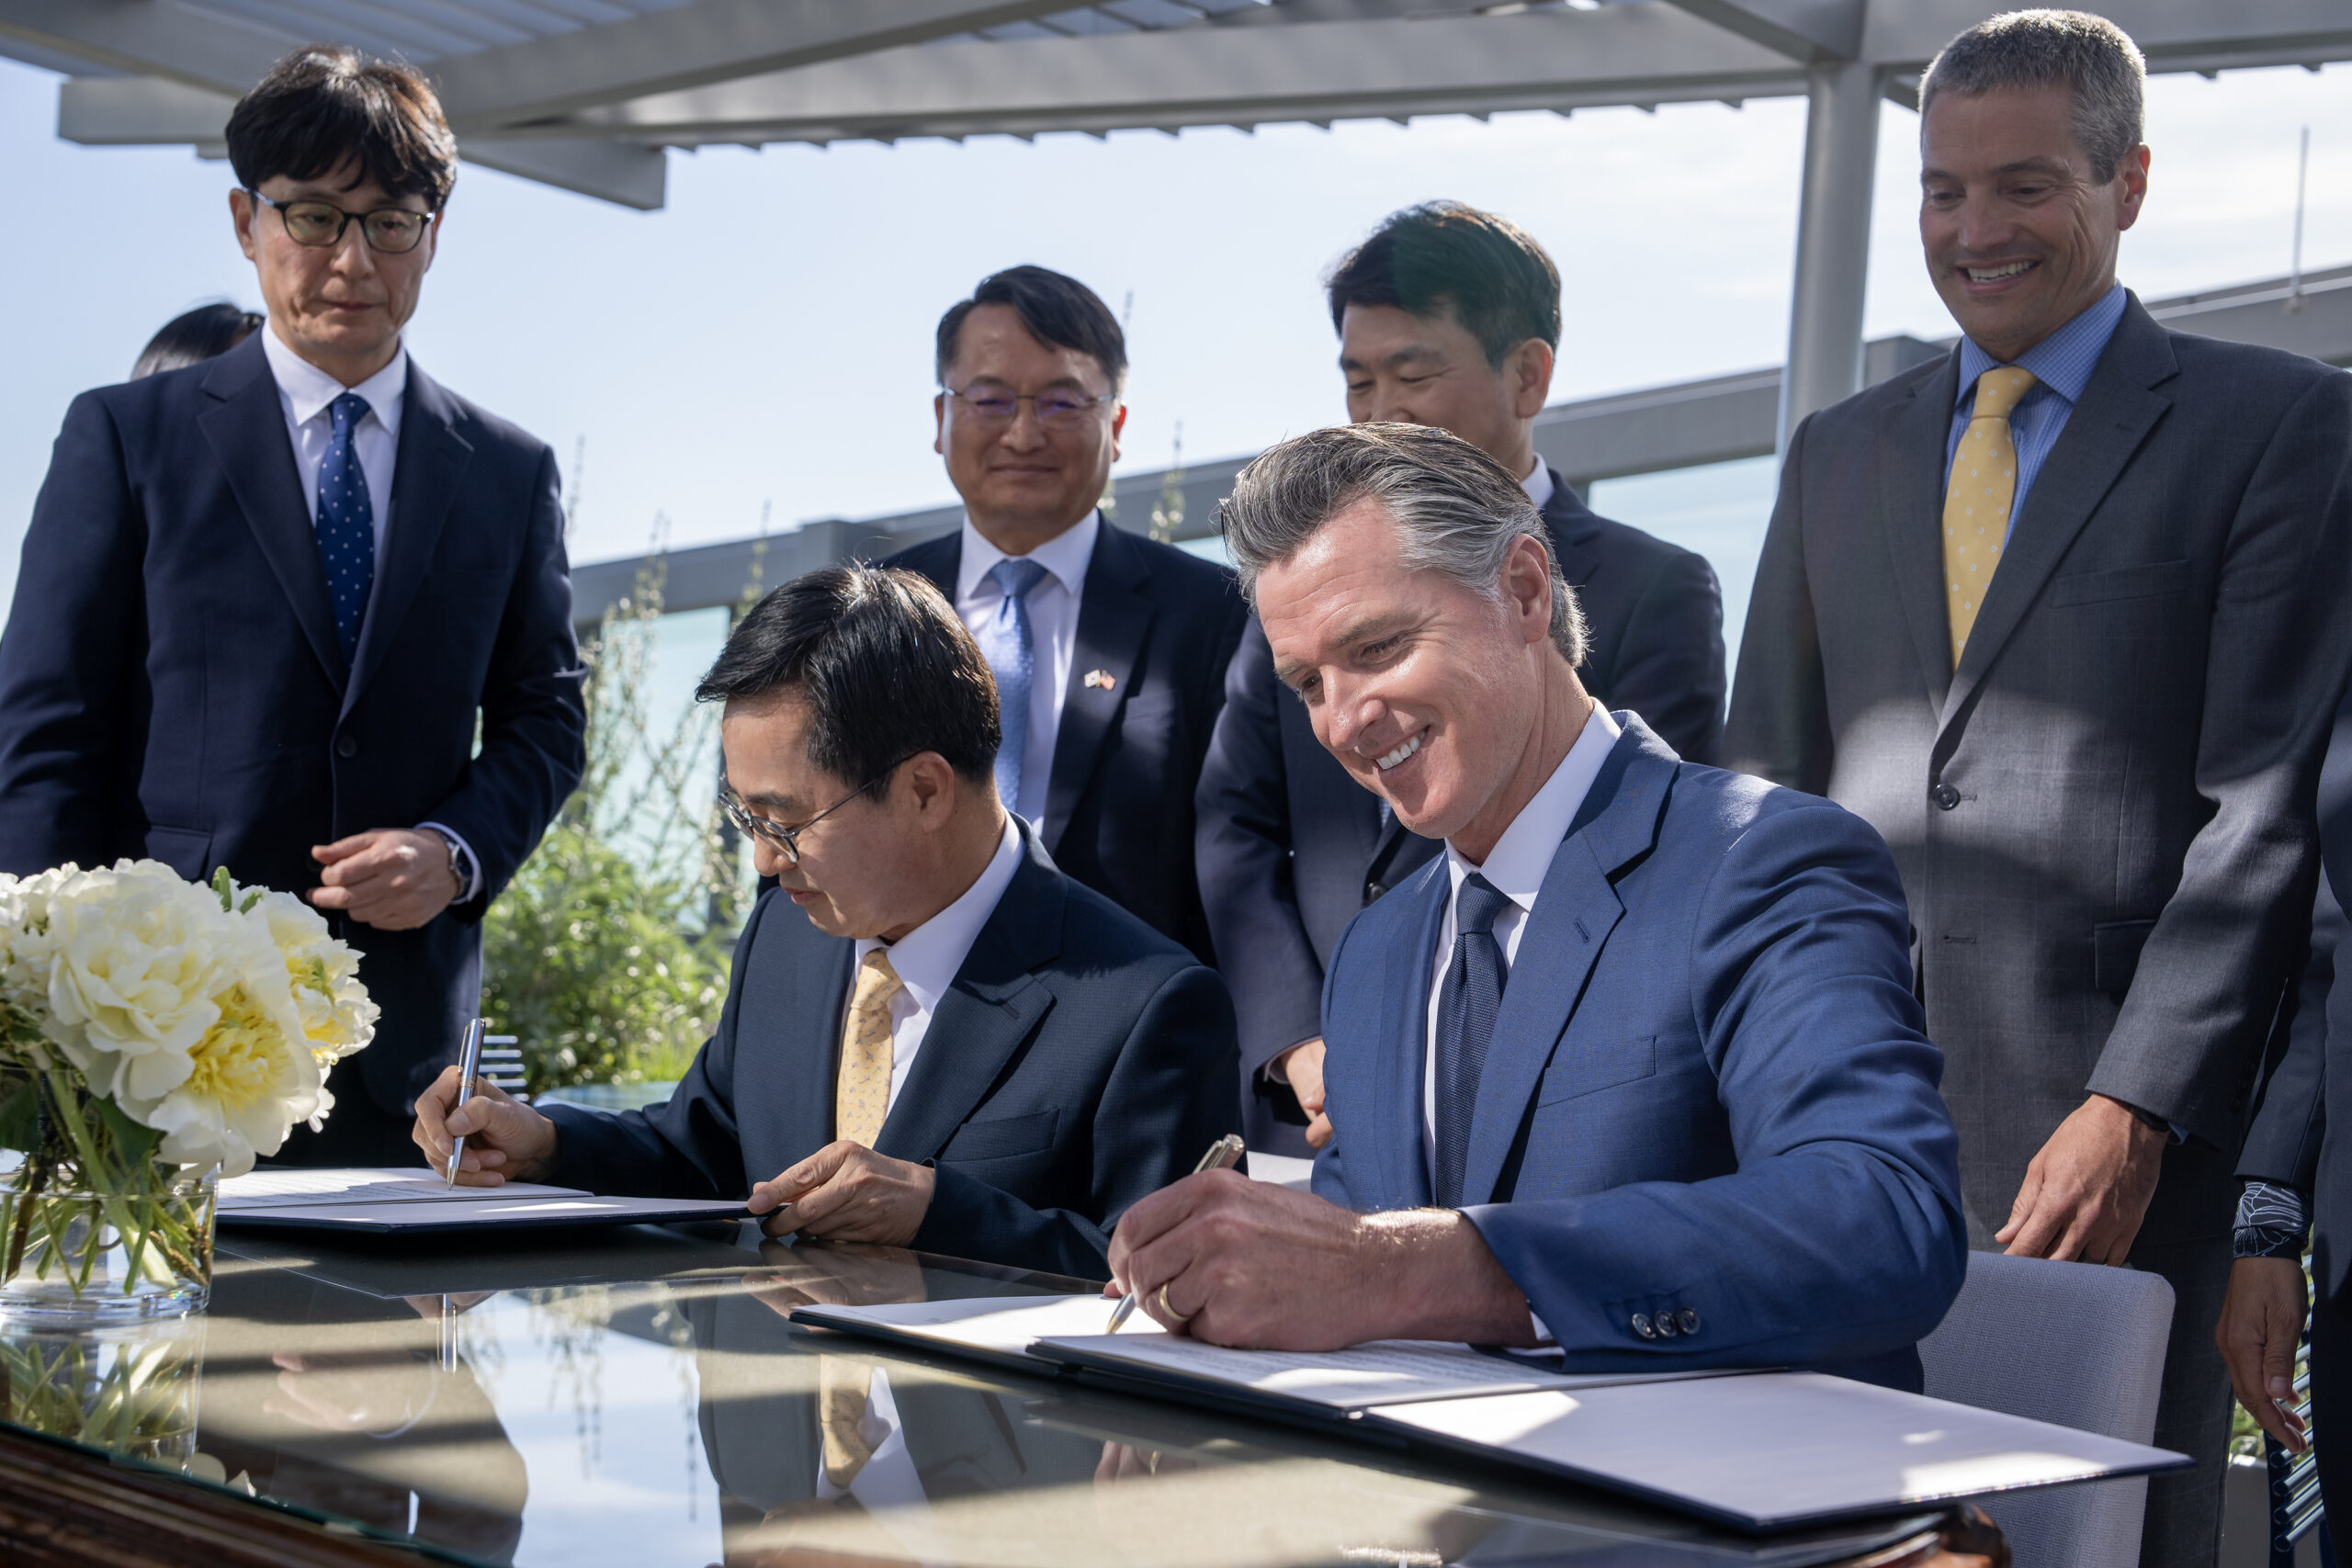 California Partners with Gyeonggi Province, The Center of South Korea’s Economy and High-Tech Industry | California Governor